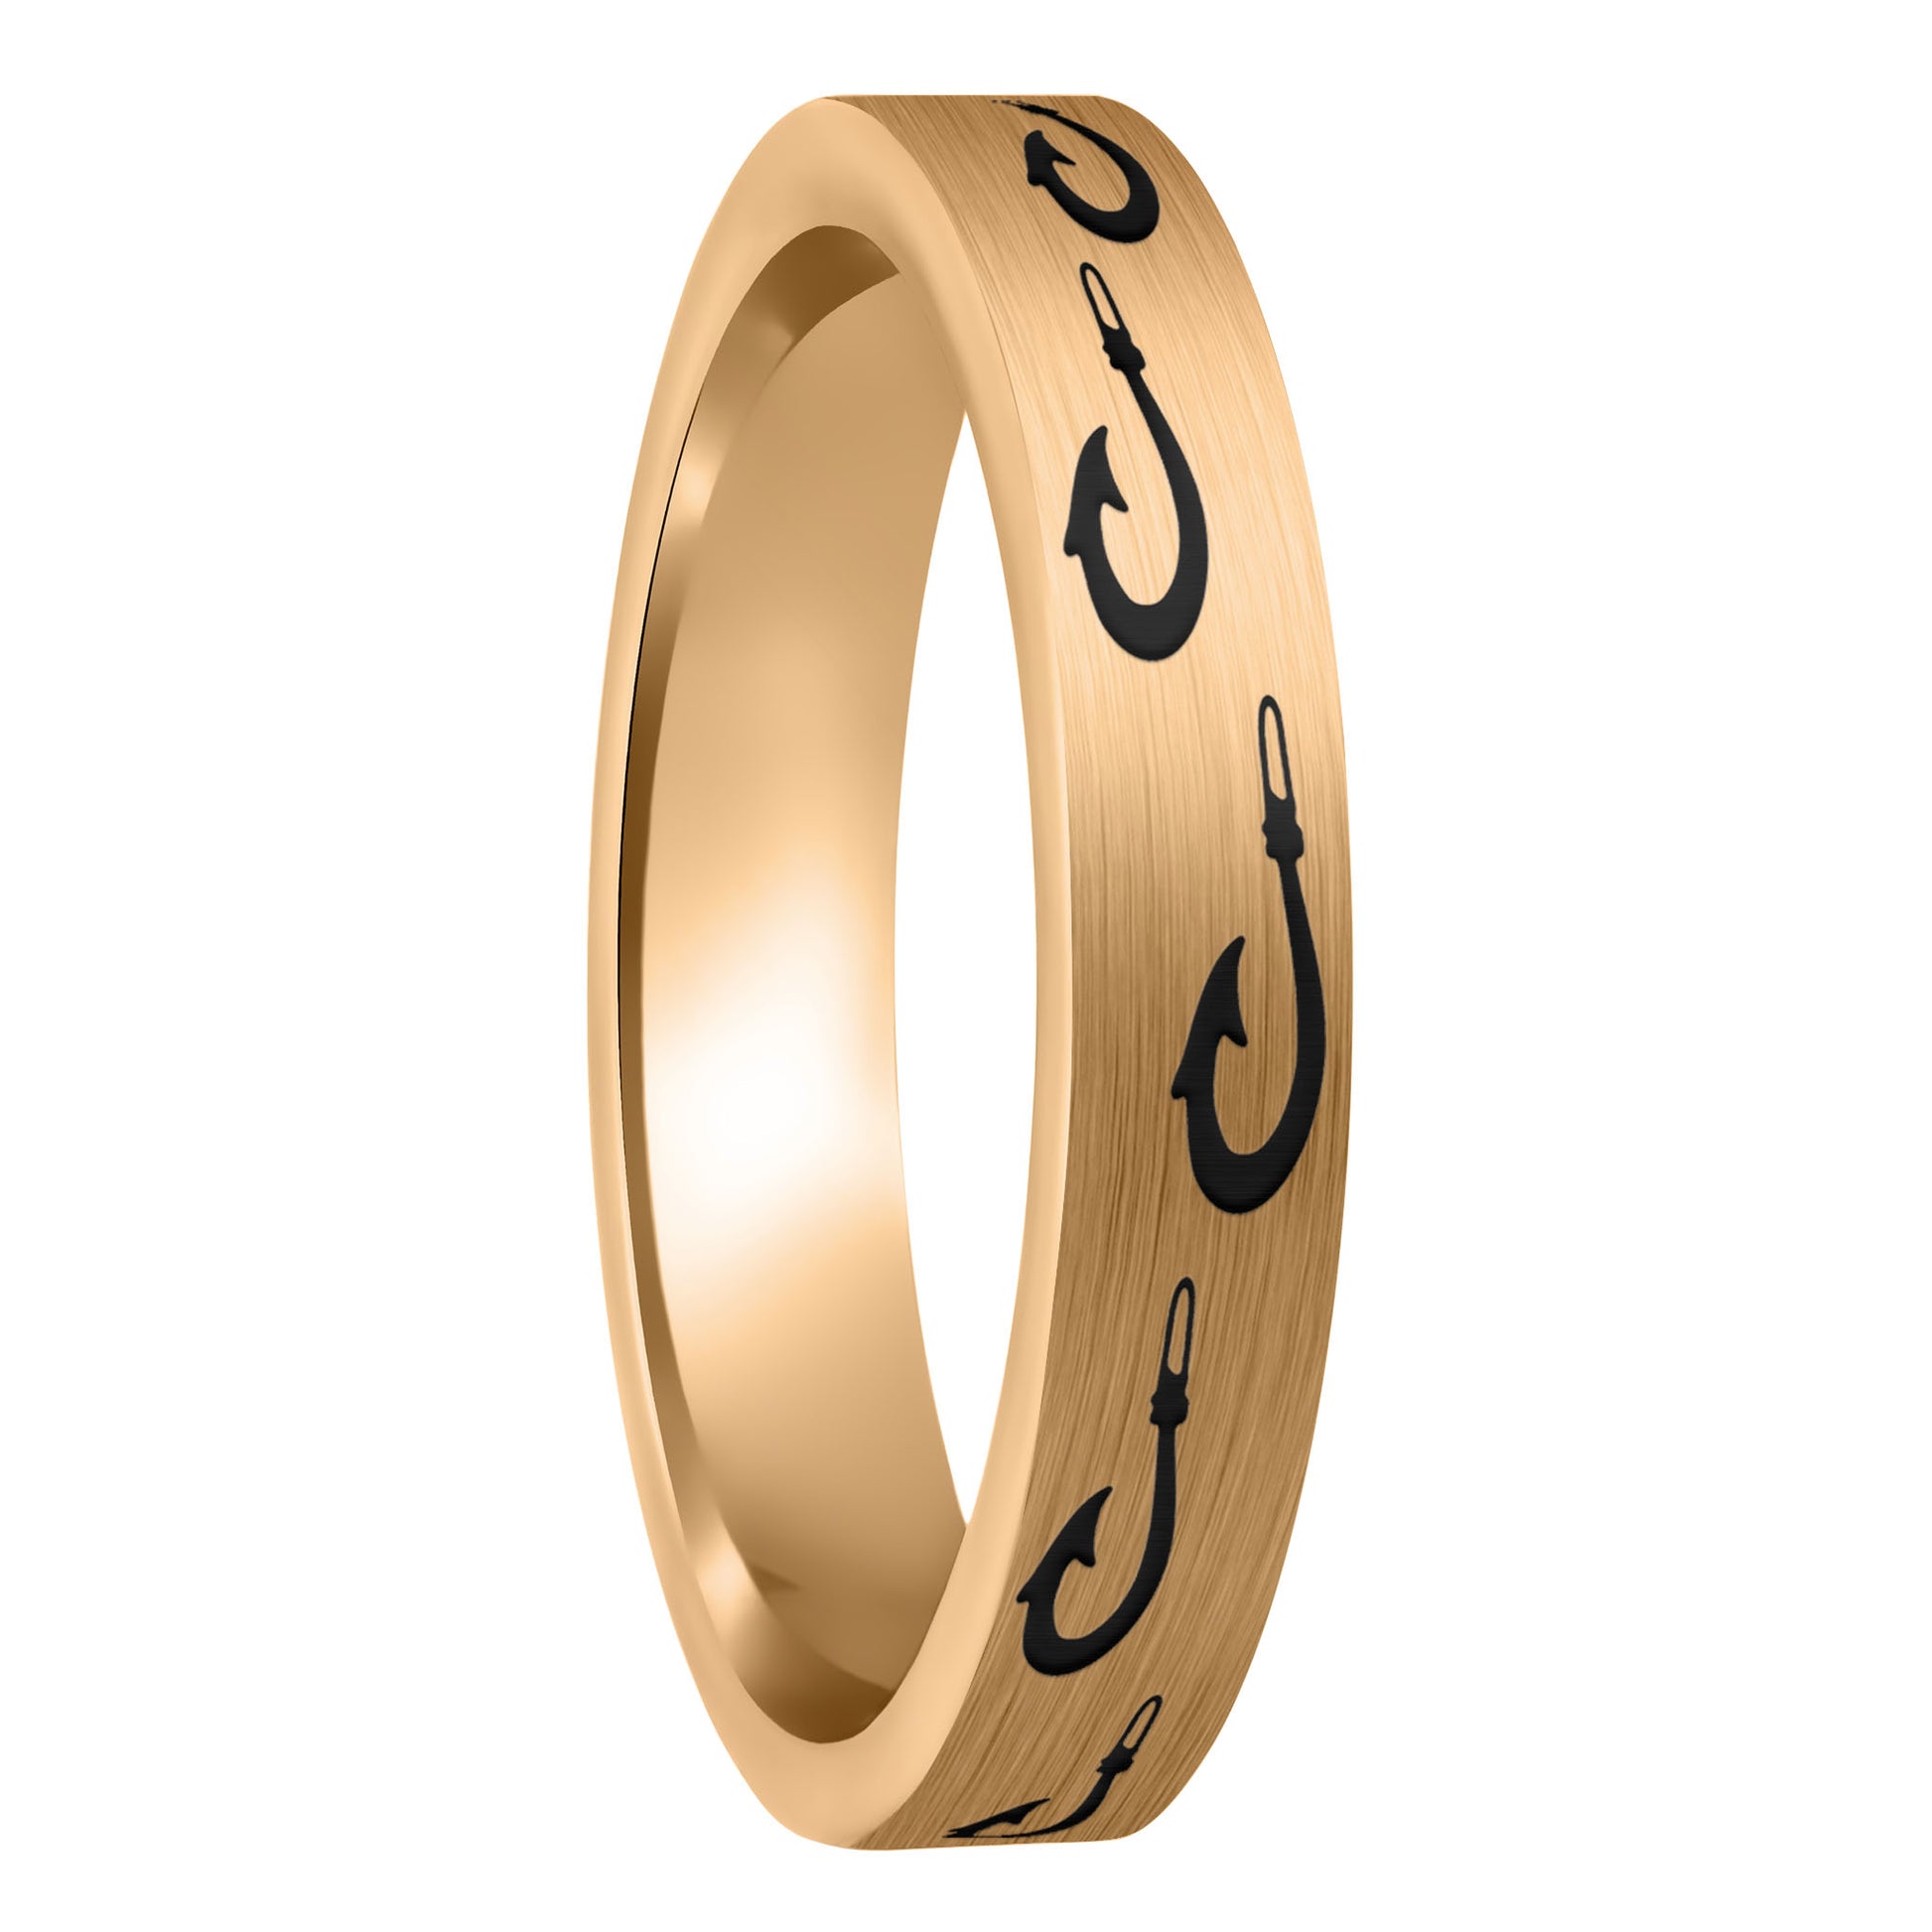 A polynesian fishing hook brushed rose gold tungsten women's wedding band displayed on a plain white background.